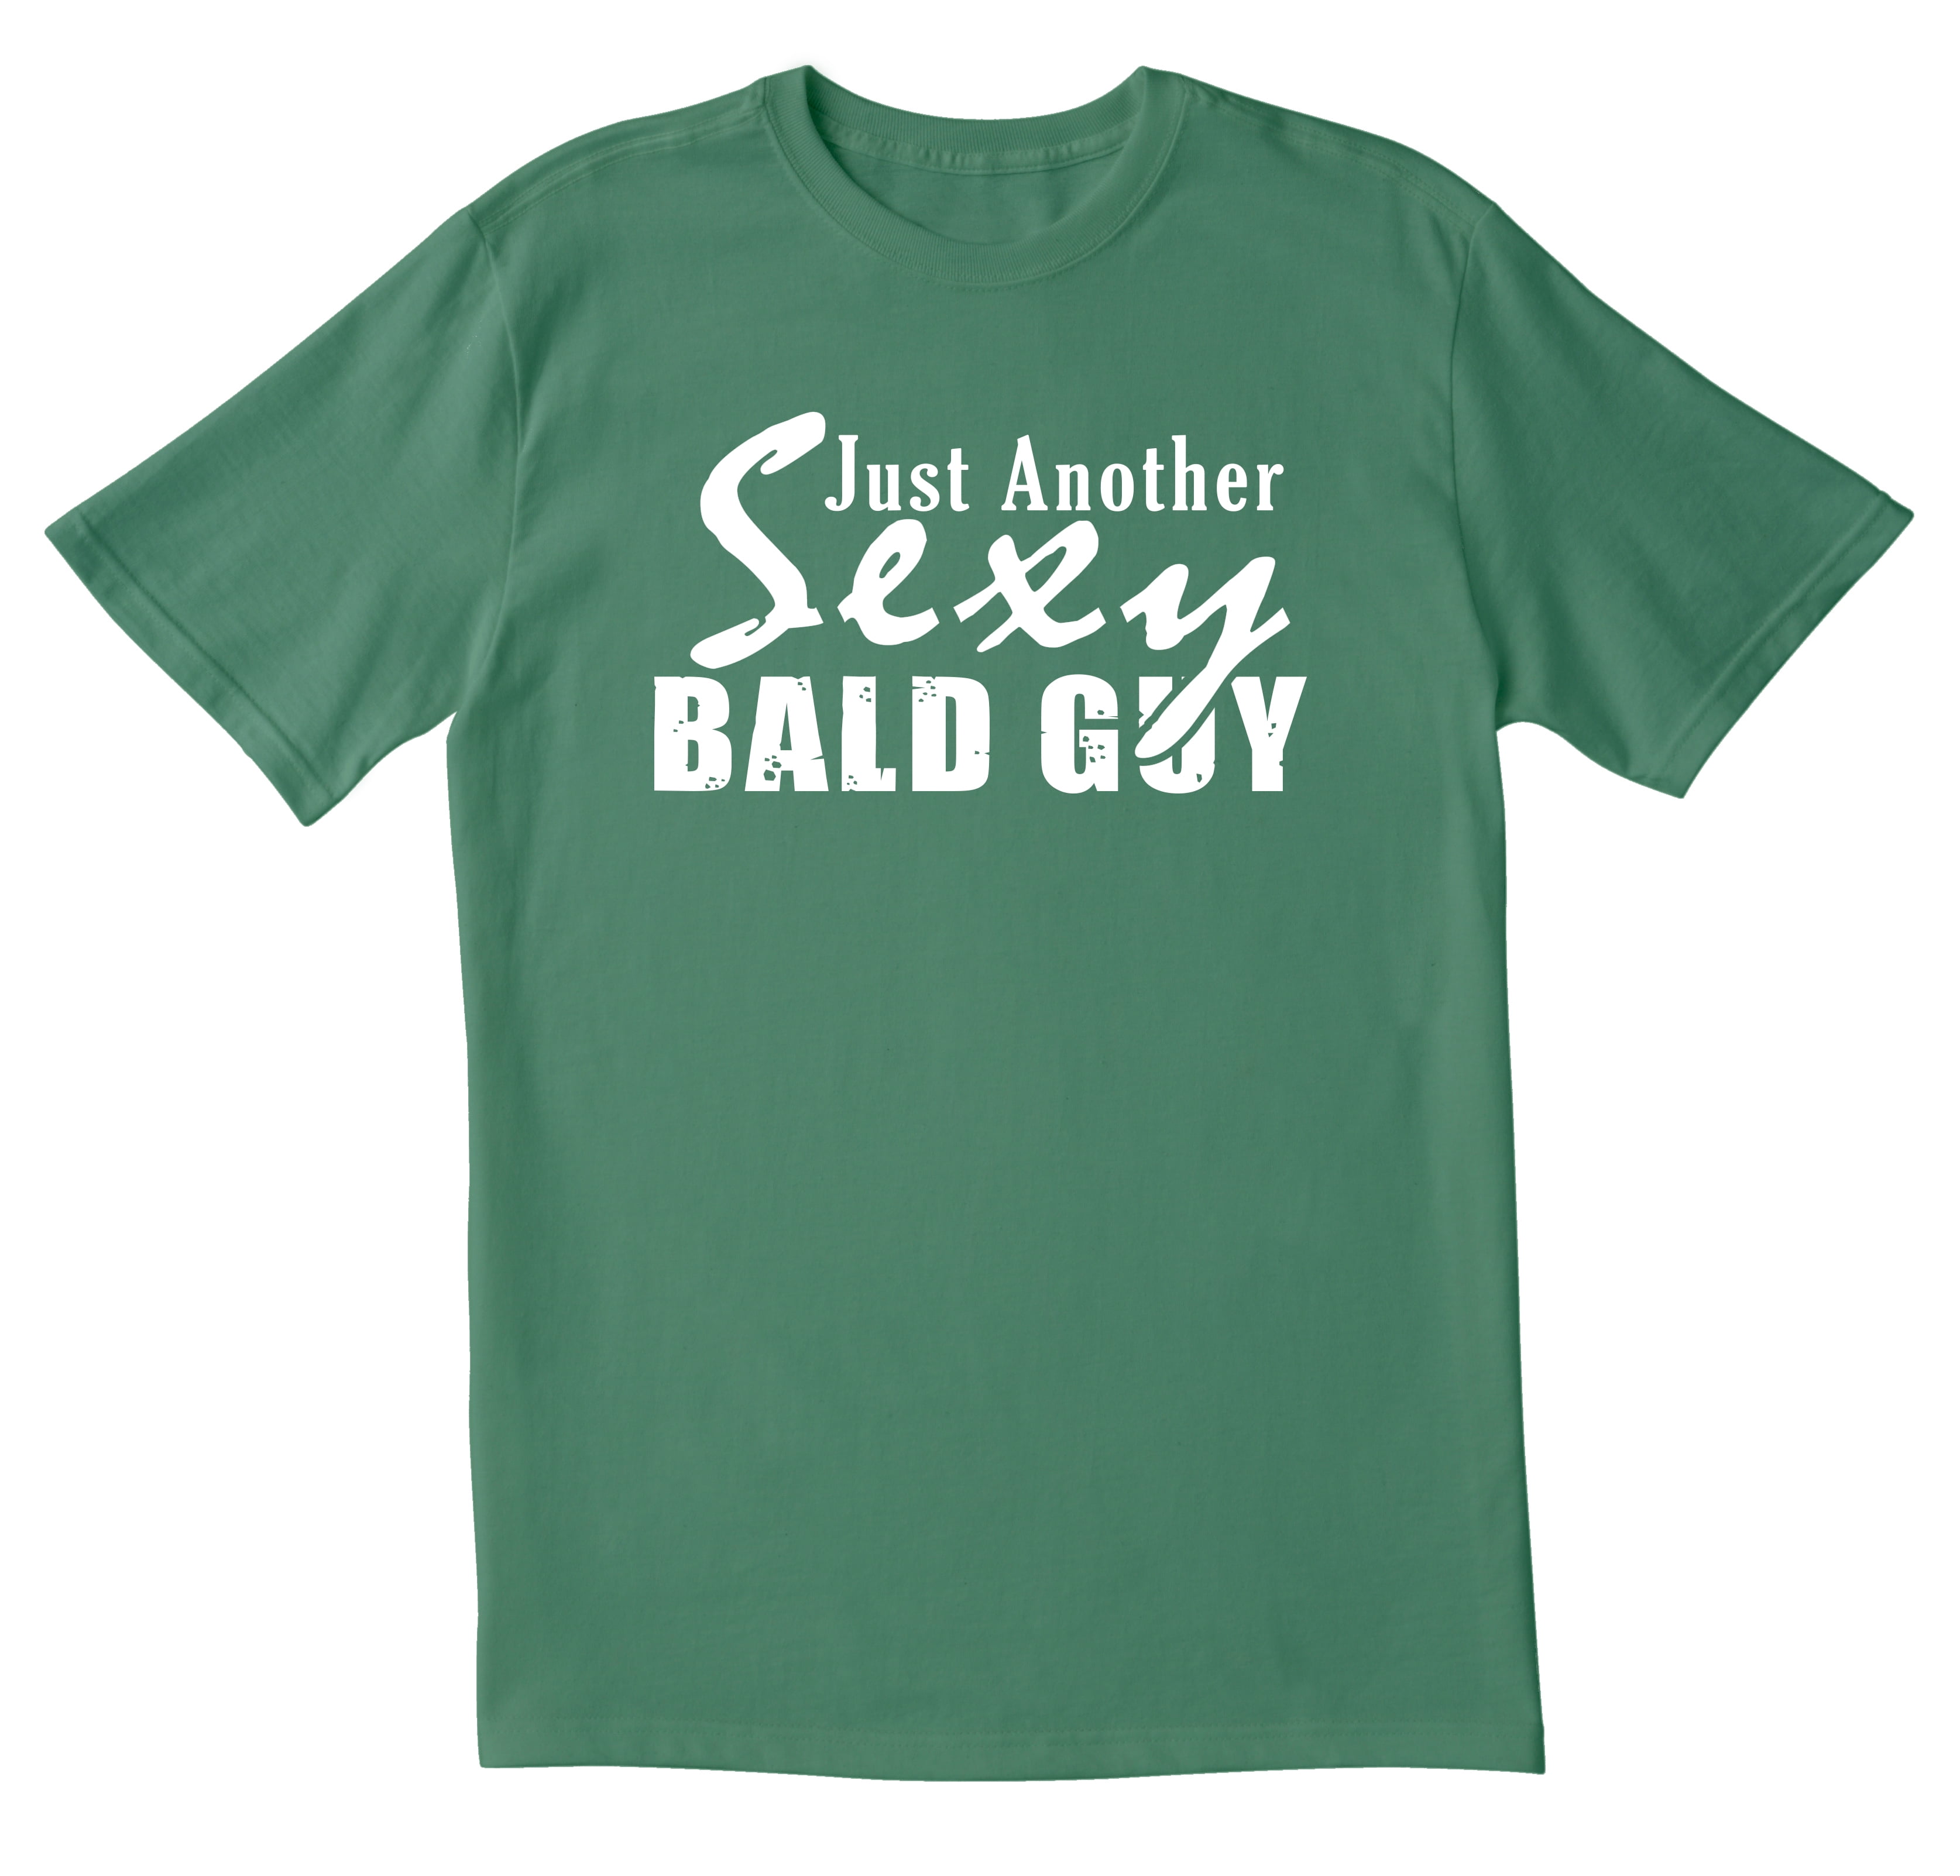 TotallyTorn Just Another Sexy Bald Guy Novelty Sarcastic Funny Mens Graphic  T Shirts 